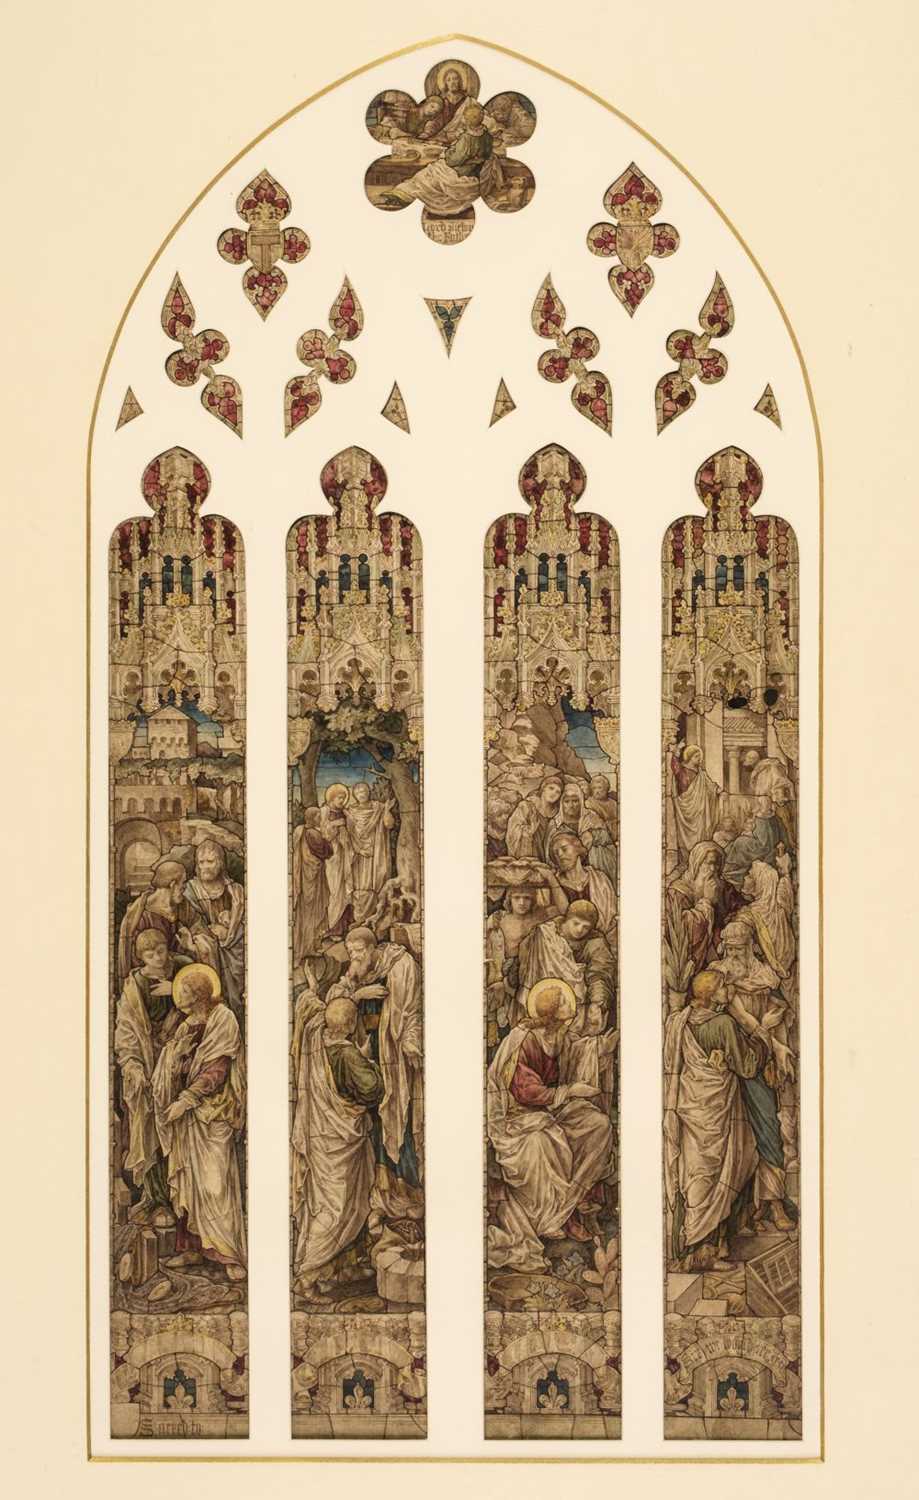 Lot 370 - Heaton, Butler & Bayne. Design for a stained glass window, 19th century